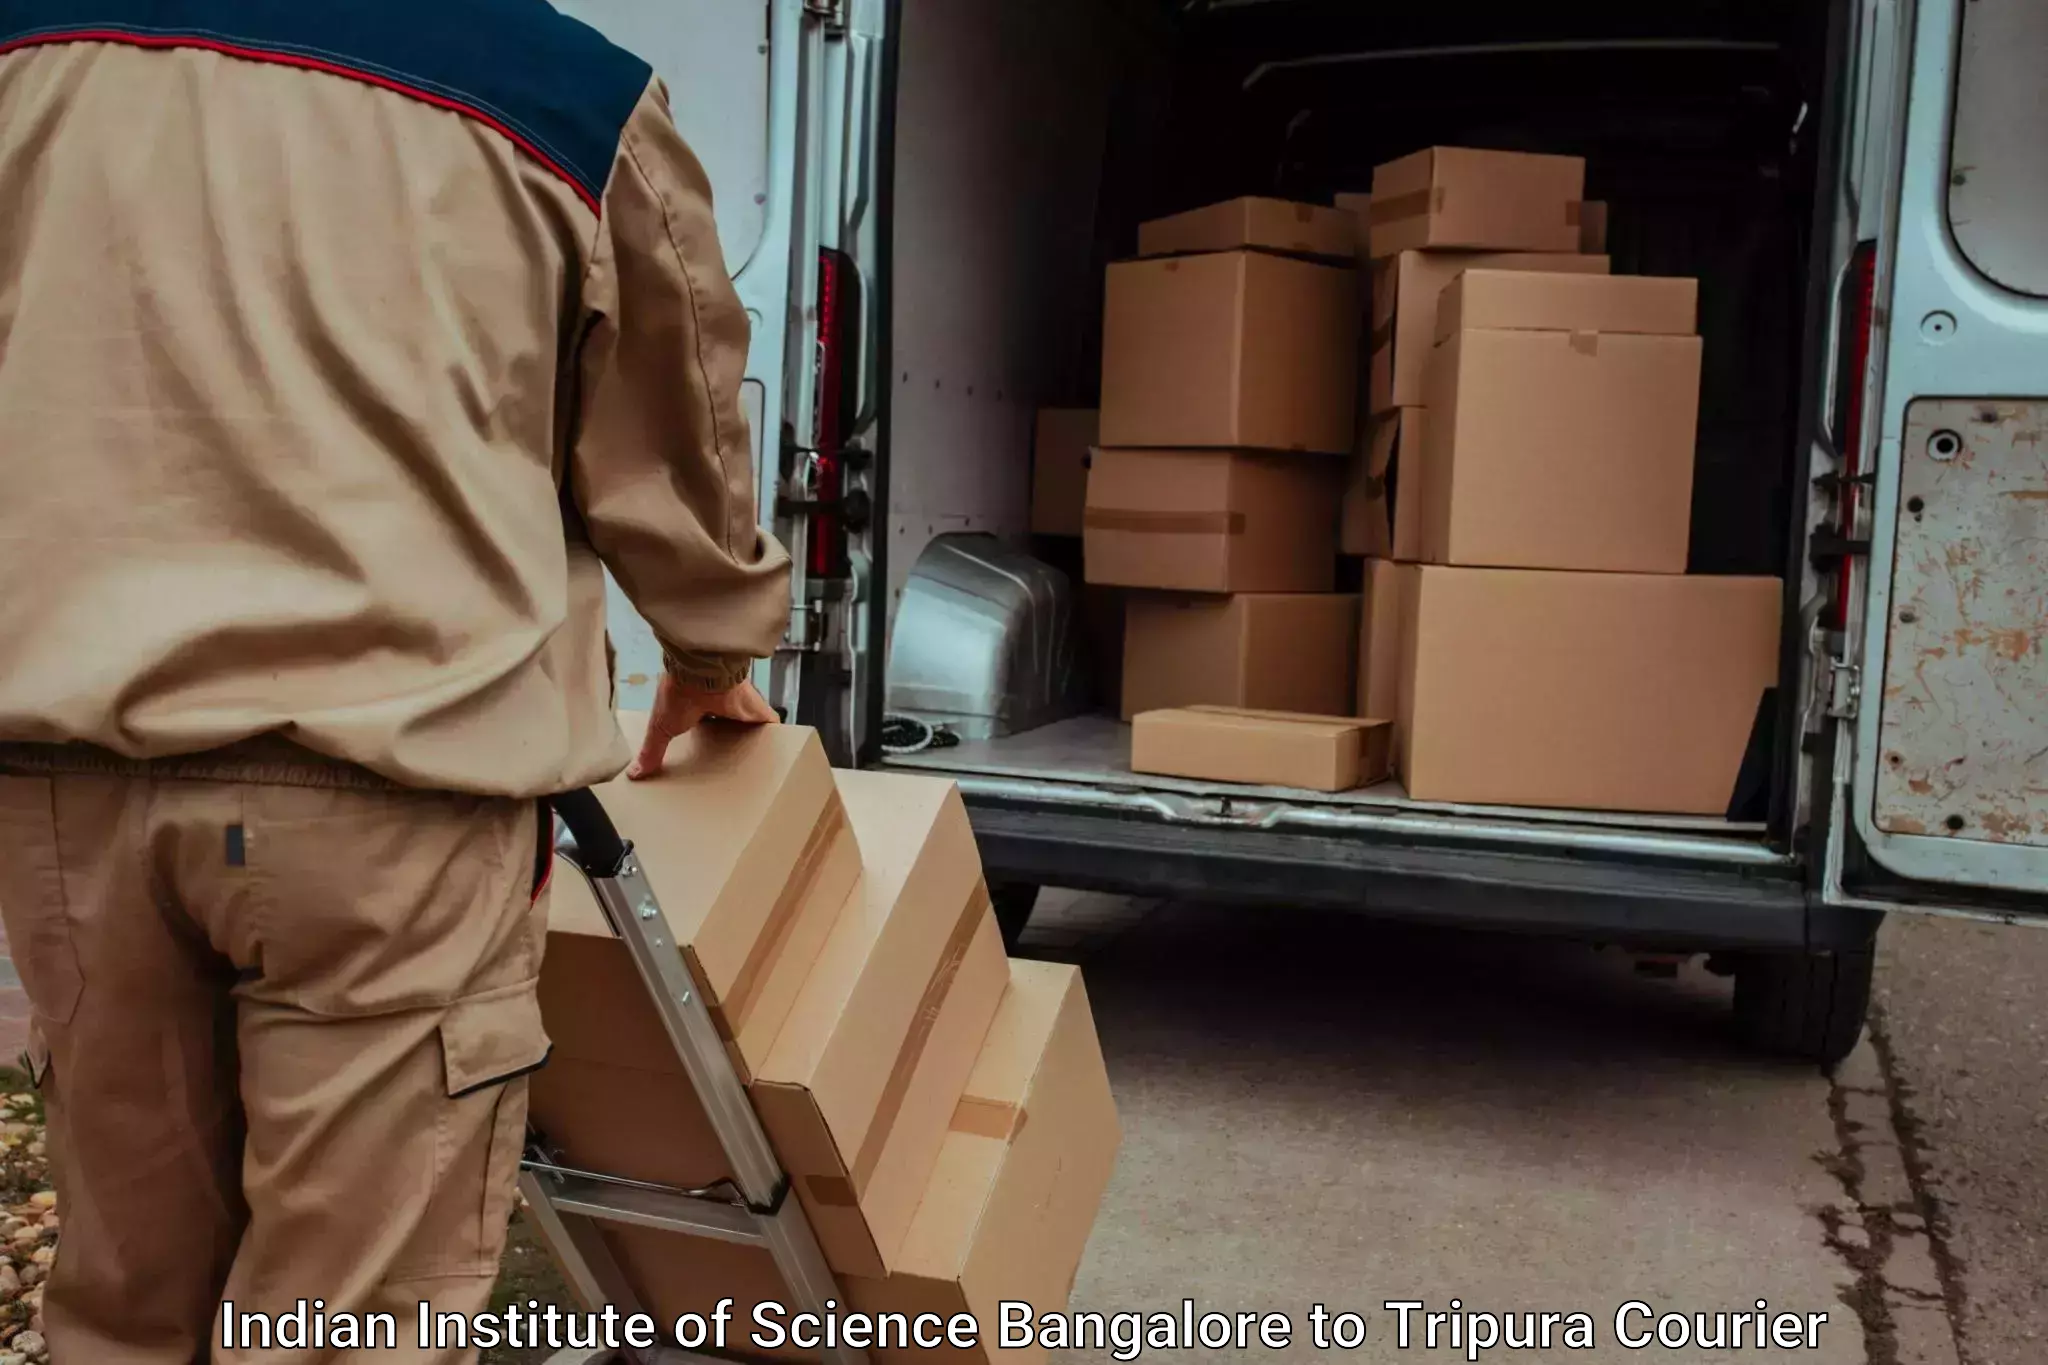 Furniture relocation experts Indian Institute of Science Bangalore to Kailashahar